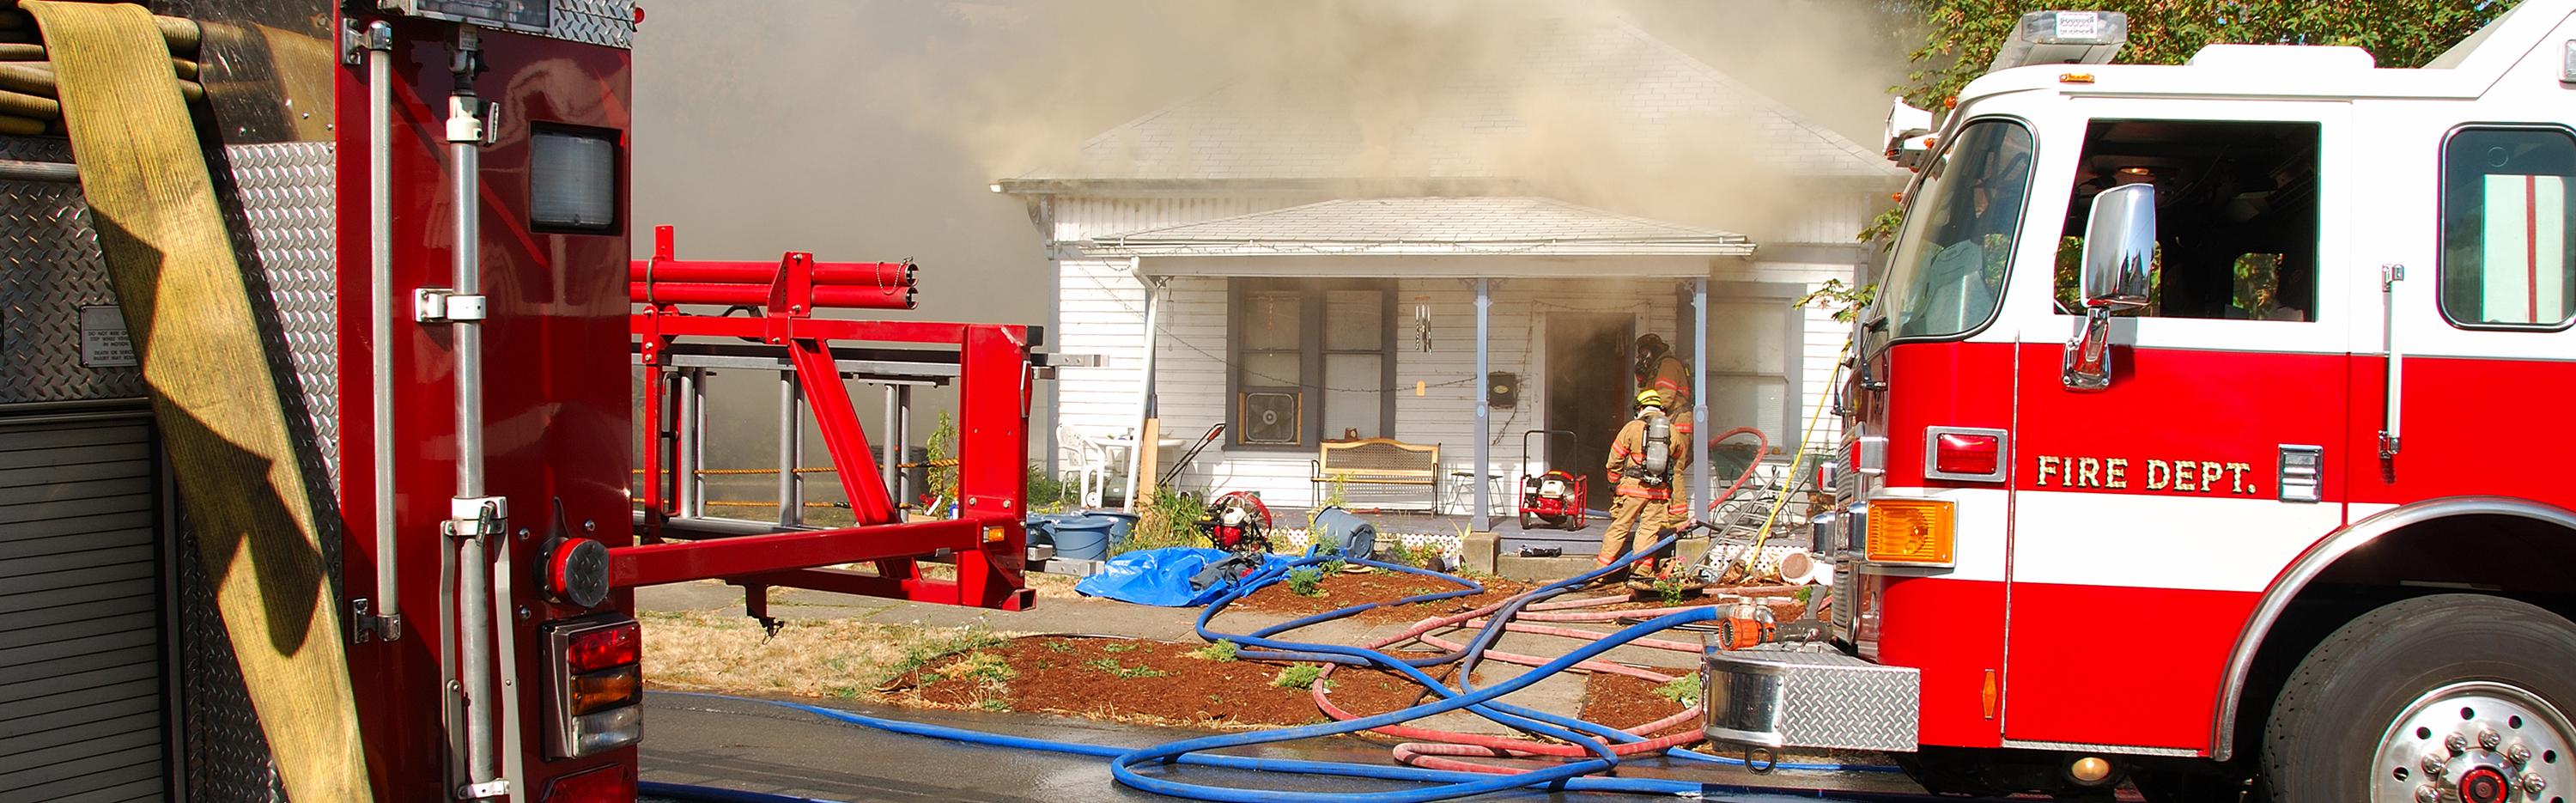 Firefighters respond to house fire